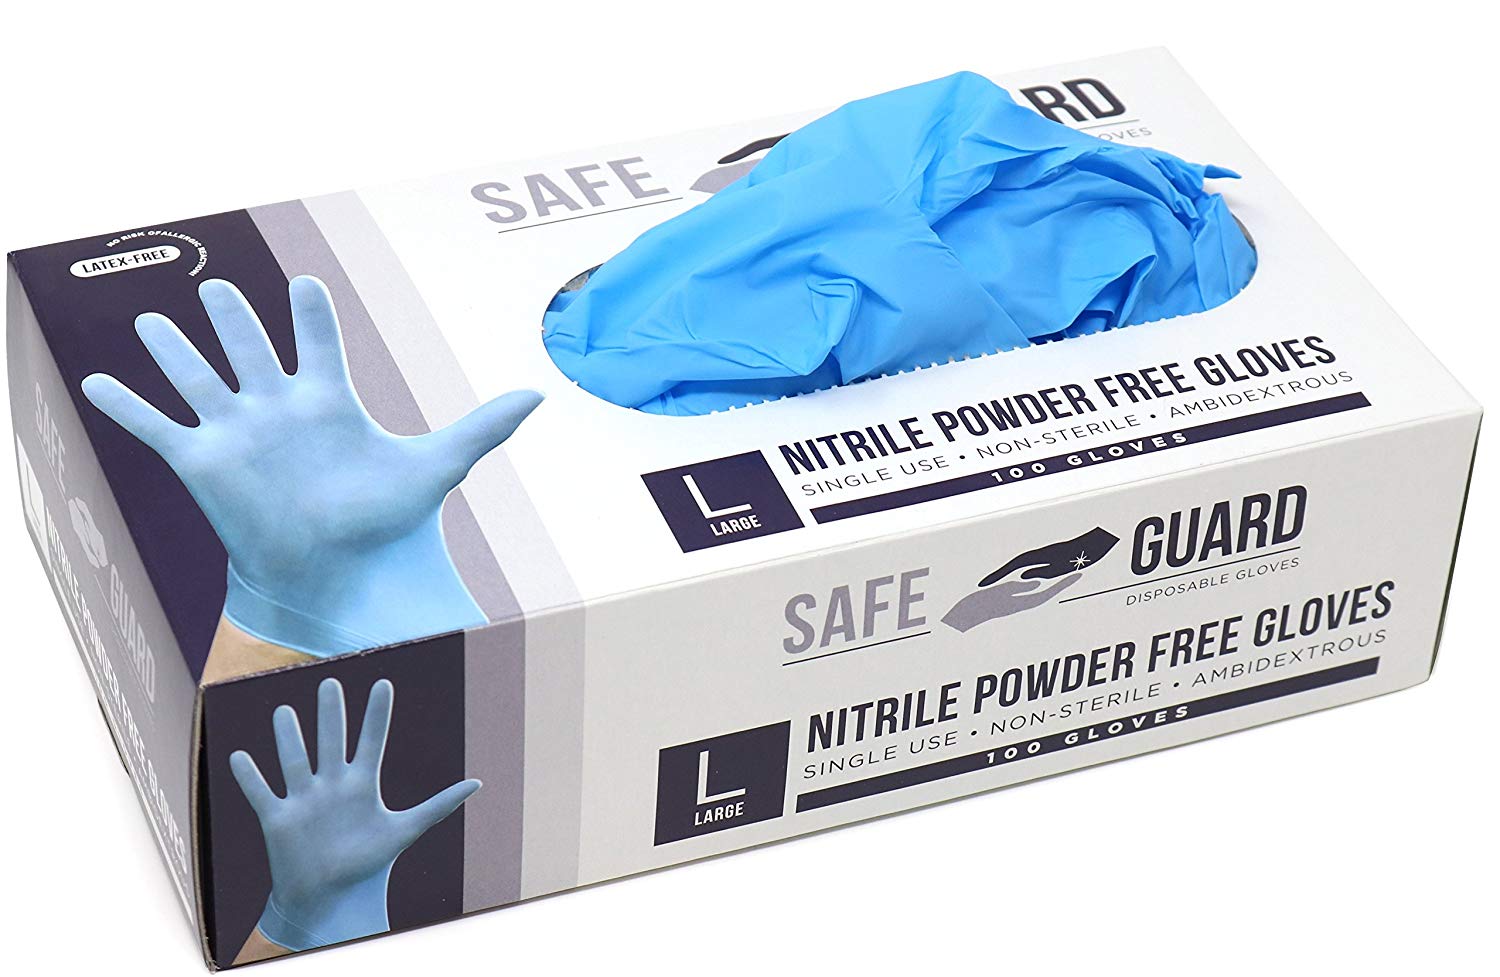 latex and powder free gloves